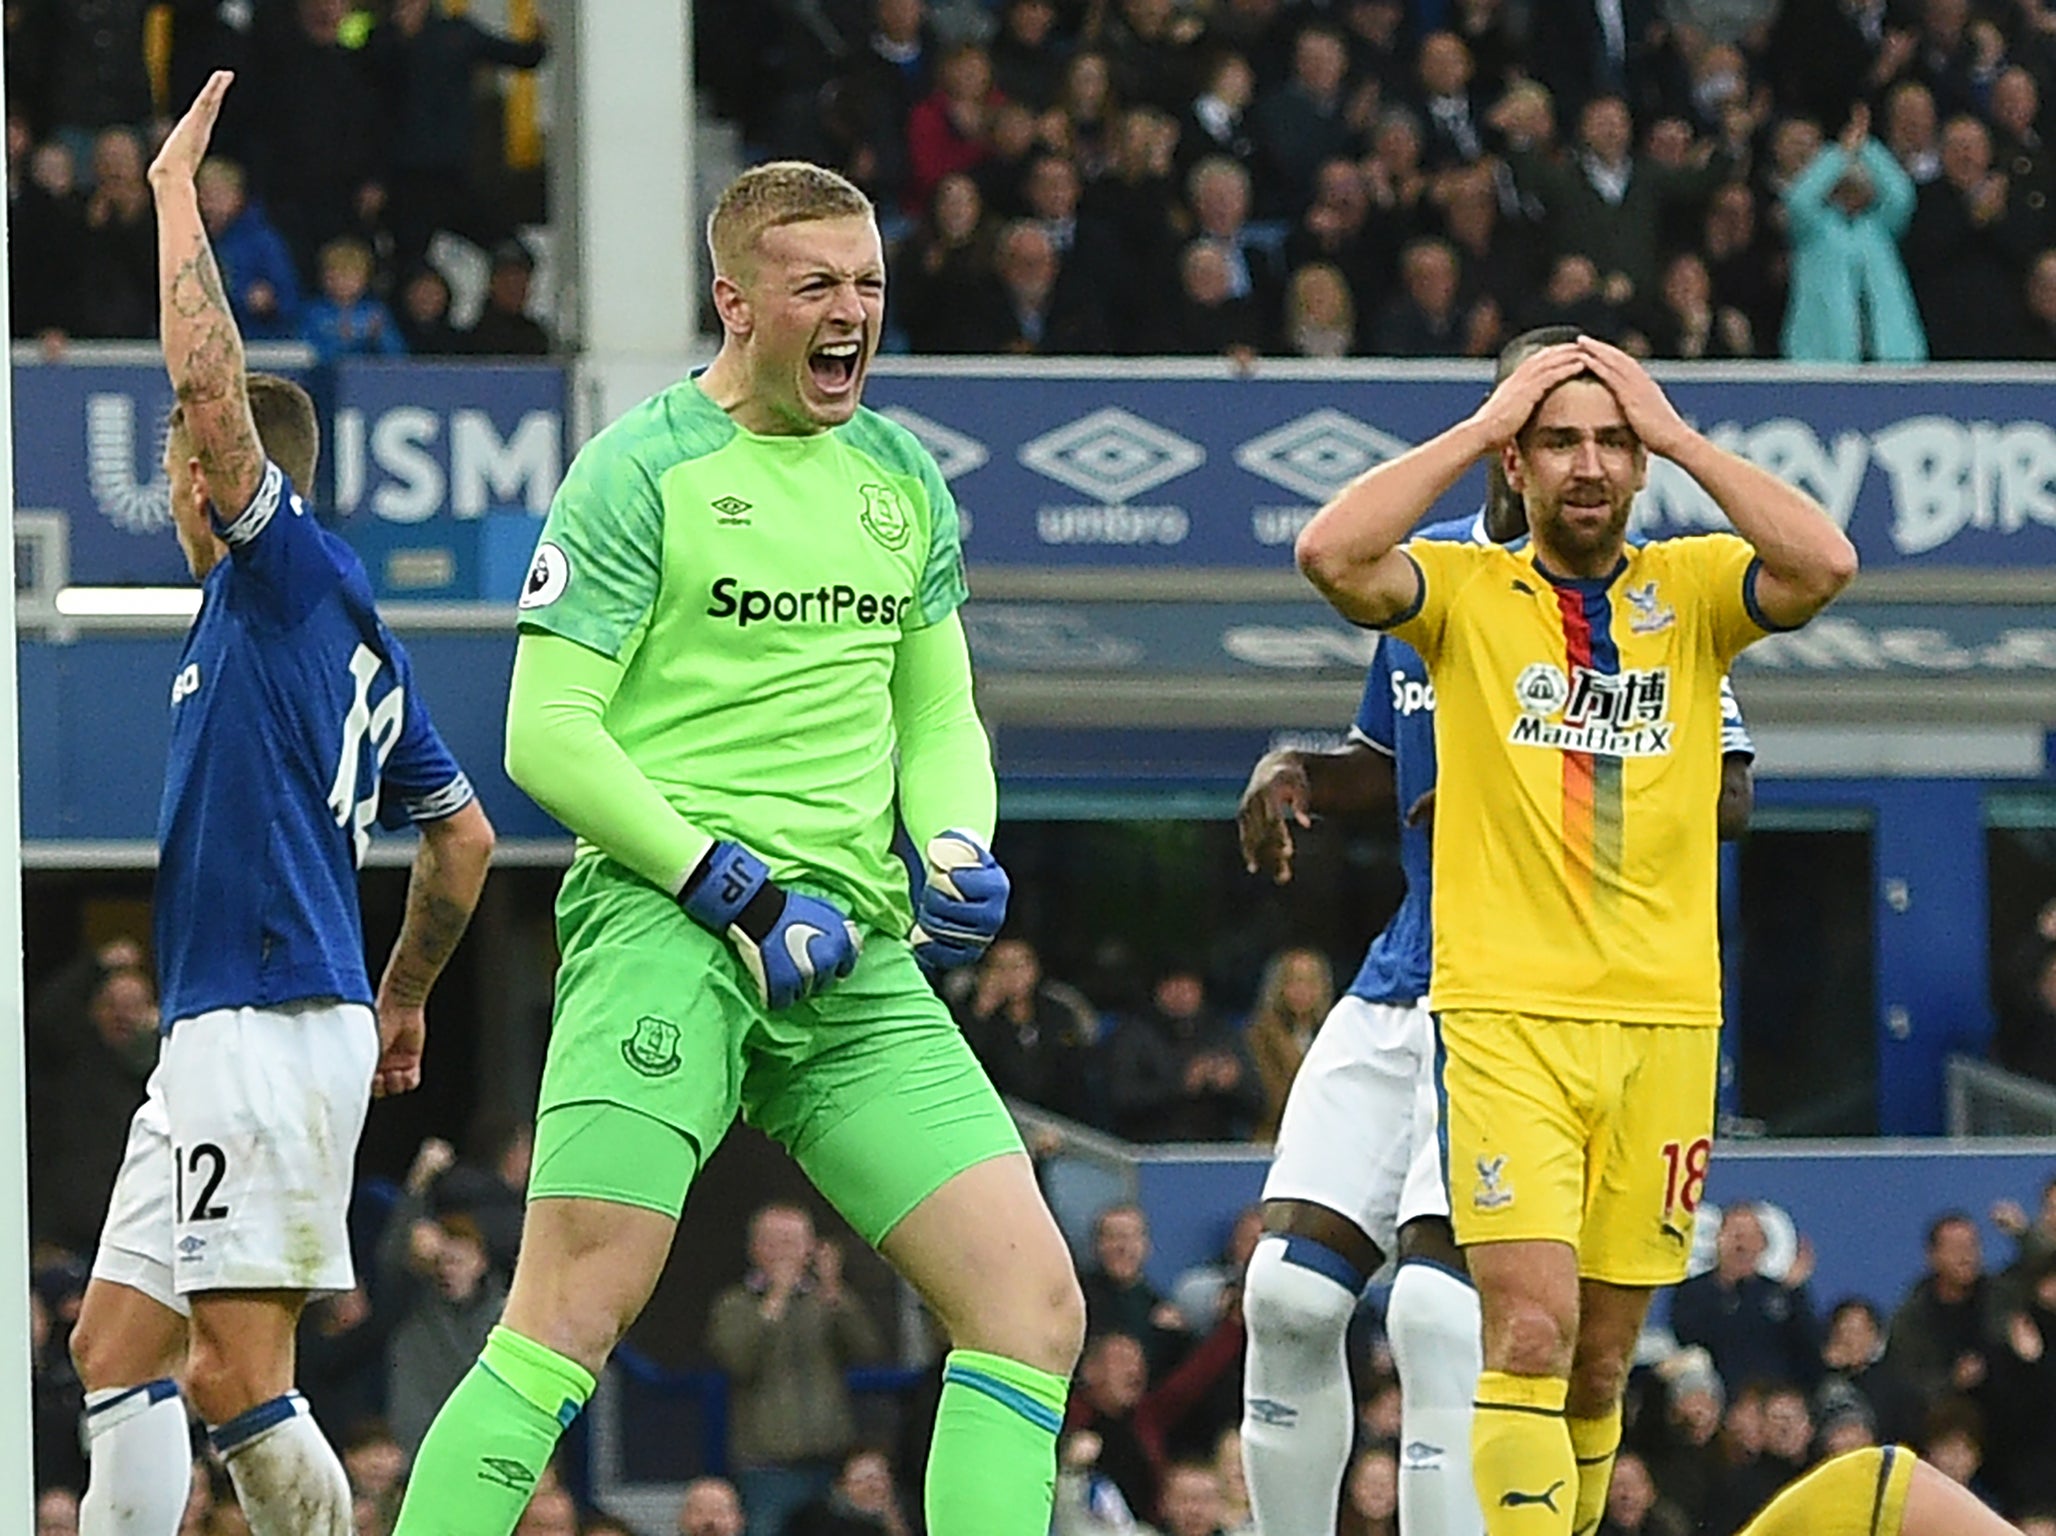 Luka Milivojevic saw his second-half penalty against Everton saved